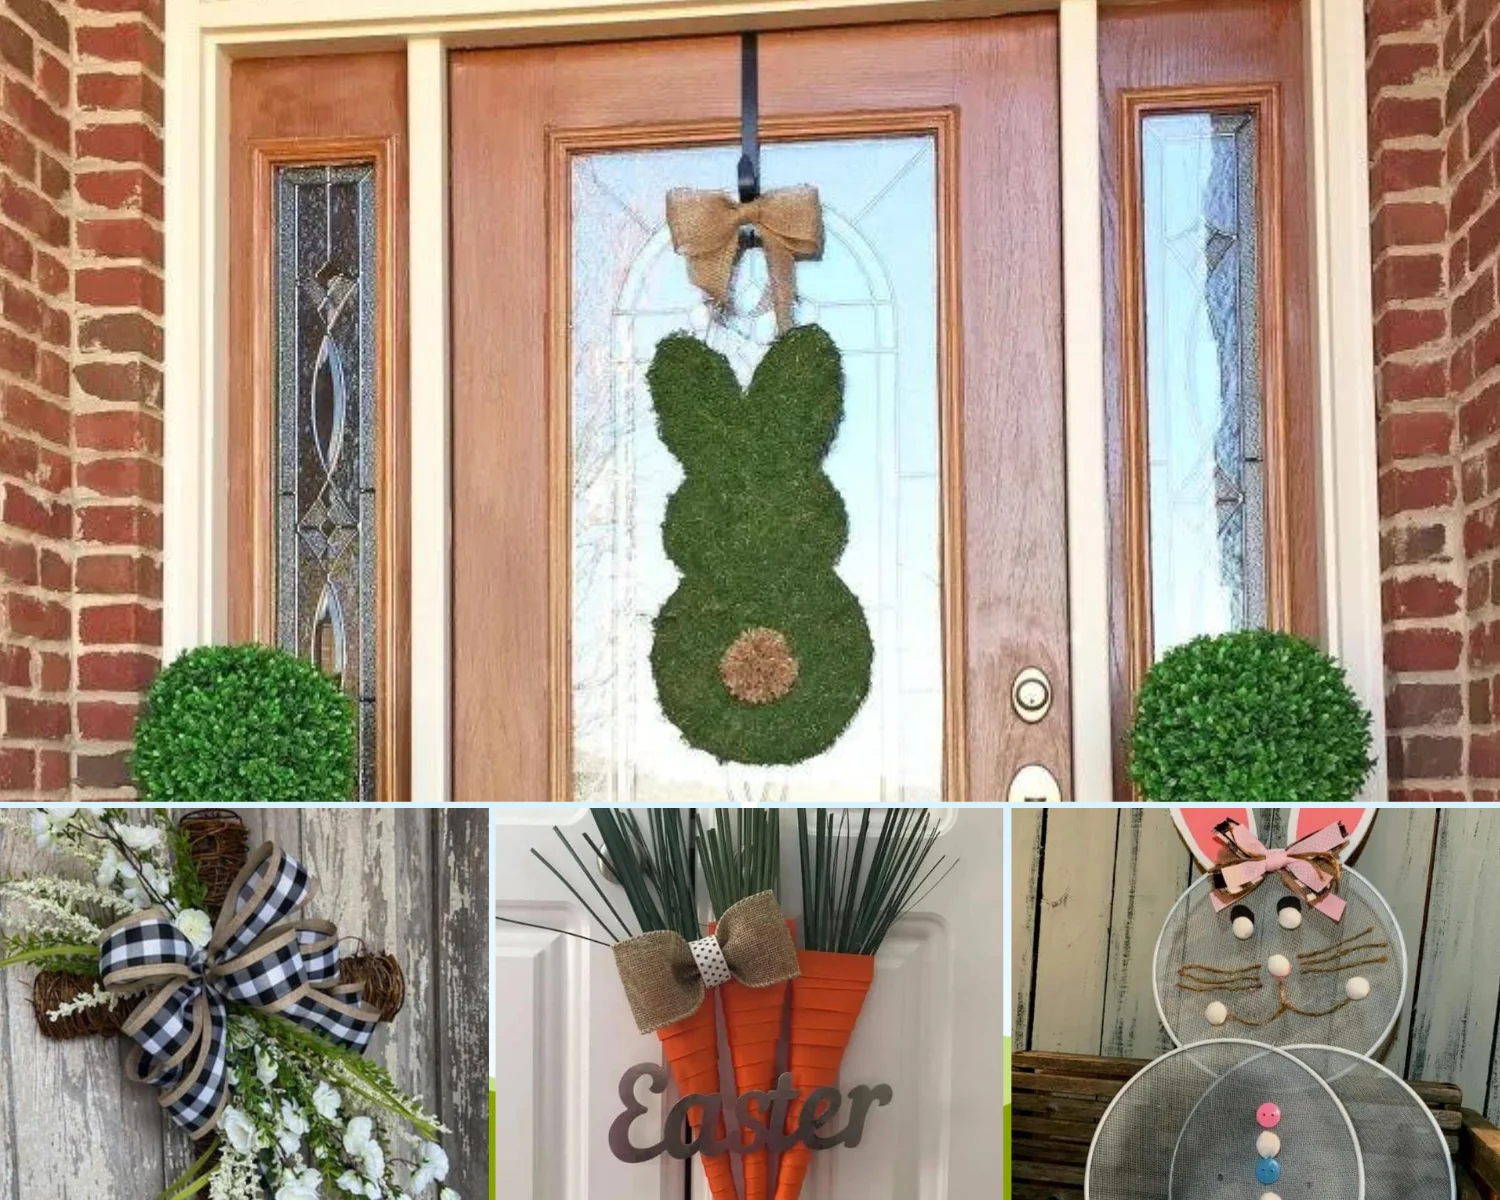 Four Easter and spring door hanger craft projects from different blogs.